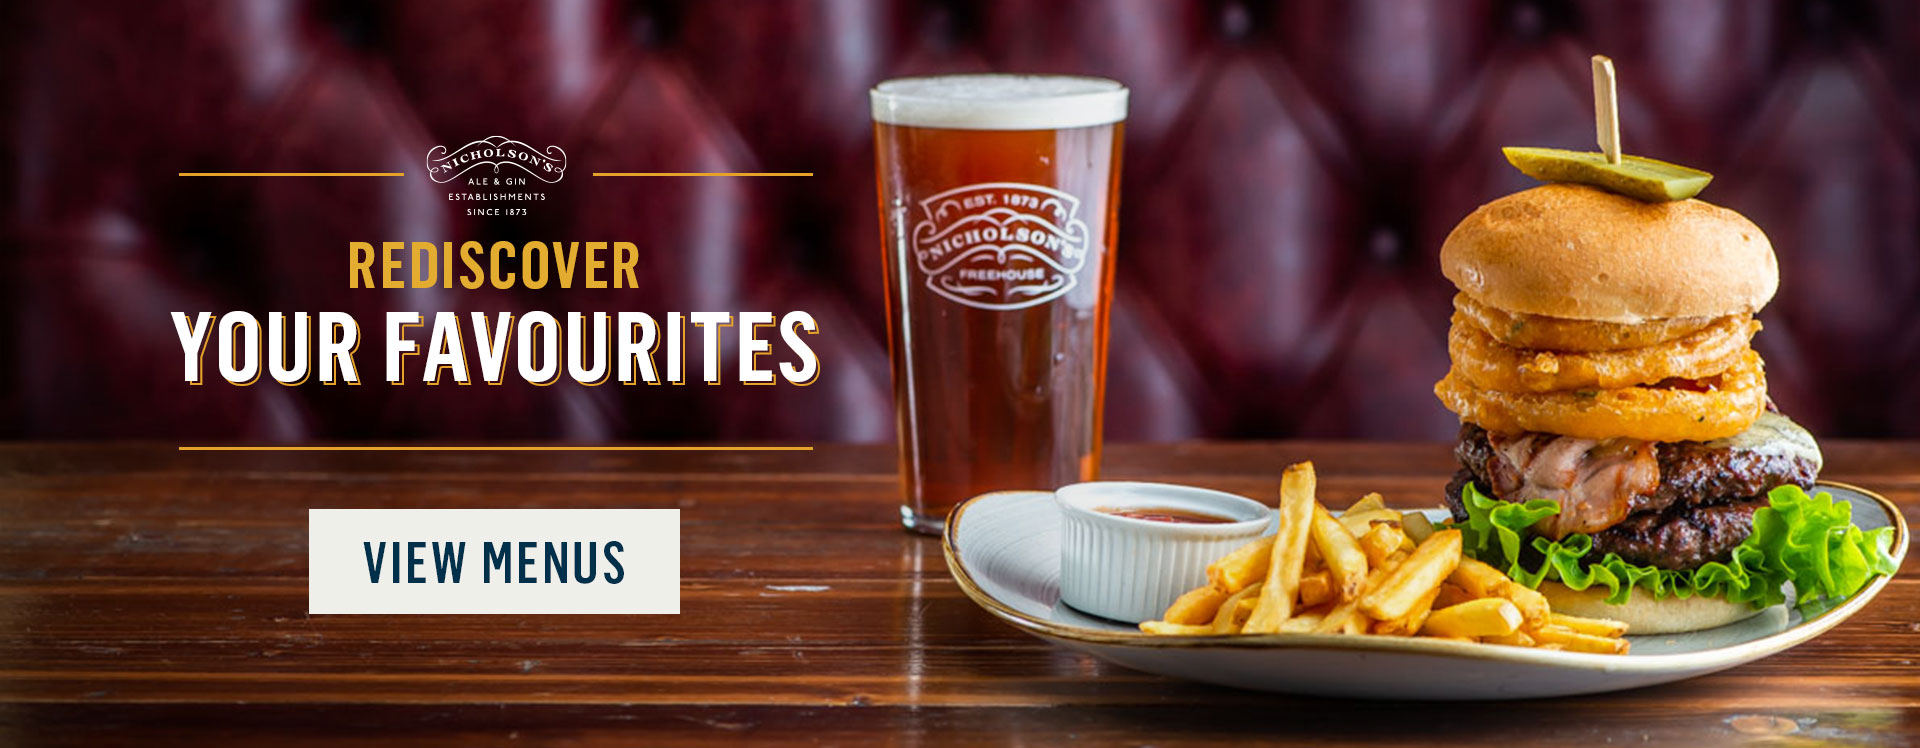 Rediscover your favourites at The Sawyer's Arms